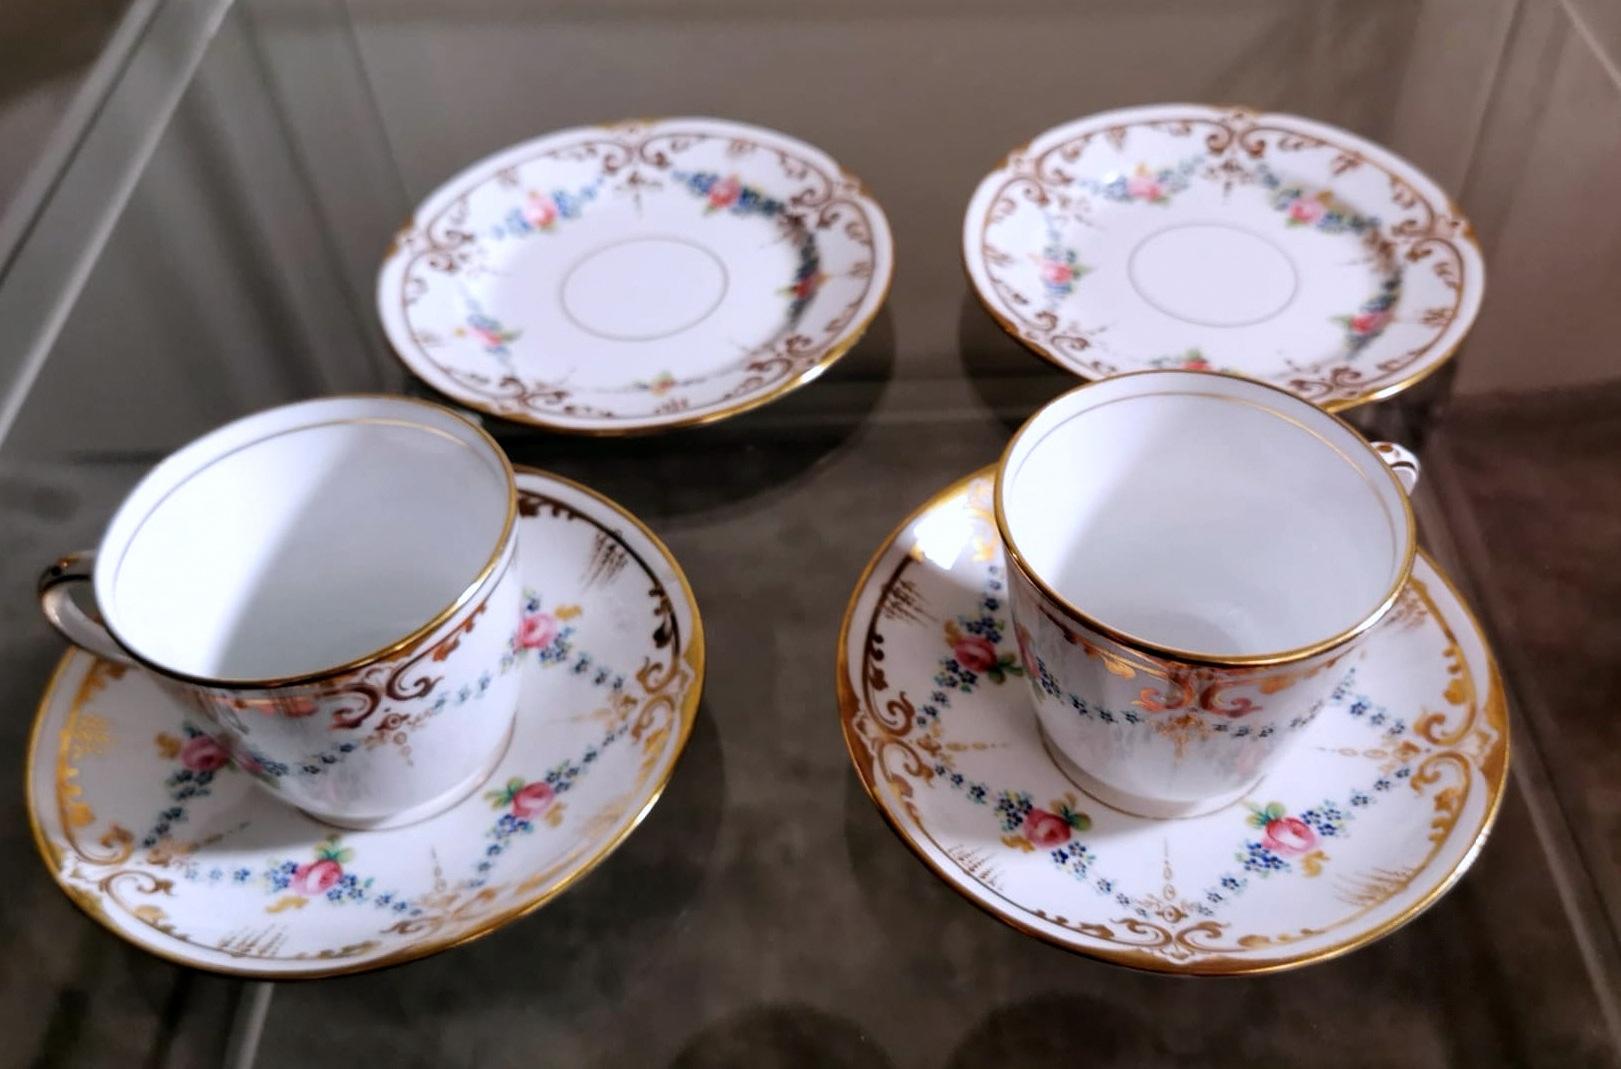 Napoleon III Style Porcelain De Paris Coffee/Tea Service For 12 People-28 Pieces In Good Condition For Sale In Prato, Tuscany